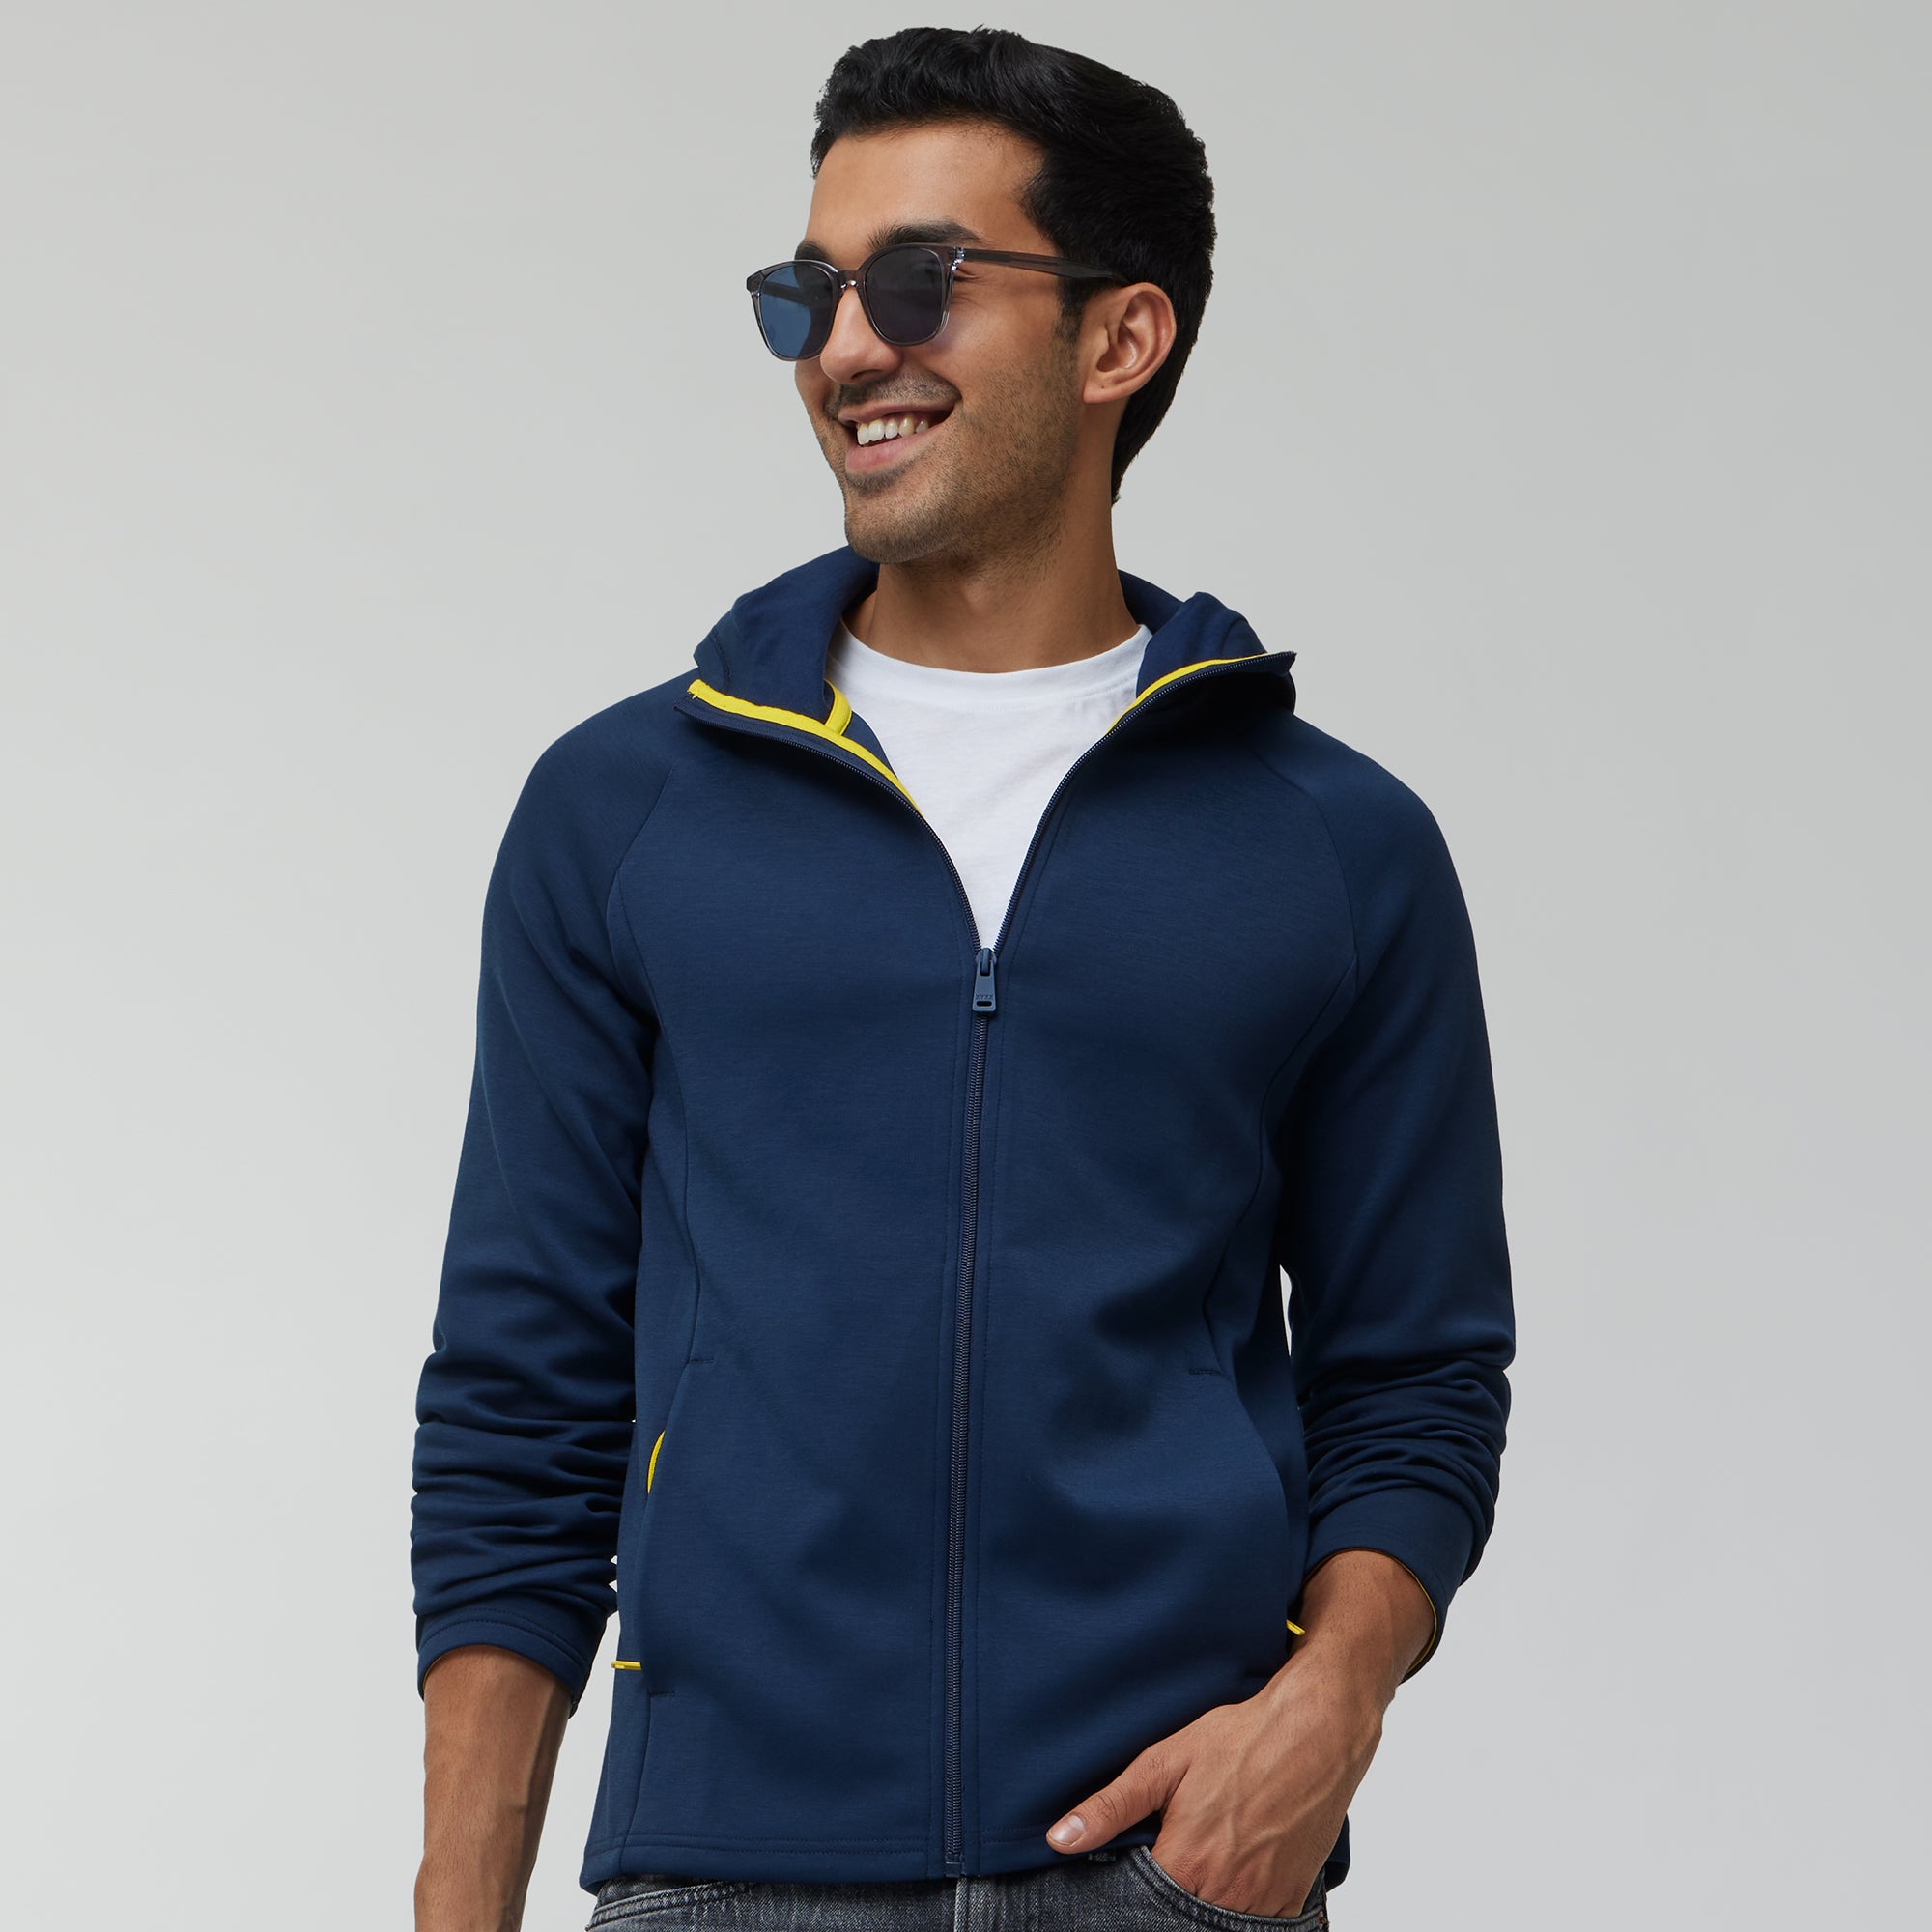 Alpha Hoodies and Jackets For Men Midnight Blue -  XYXX Crew